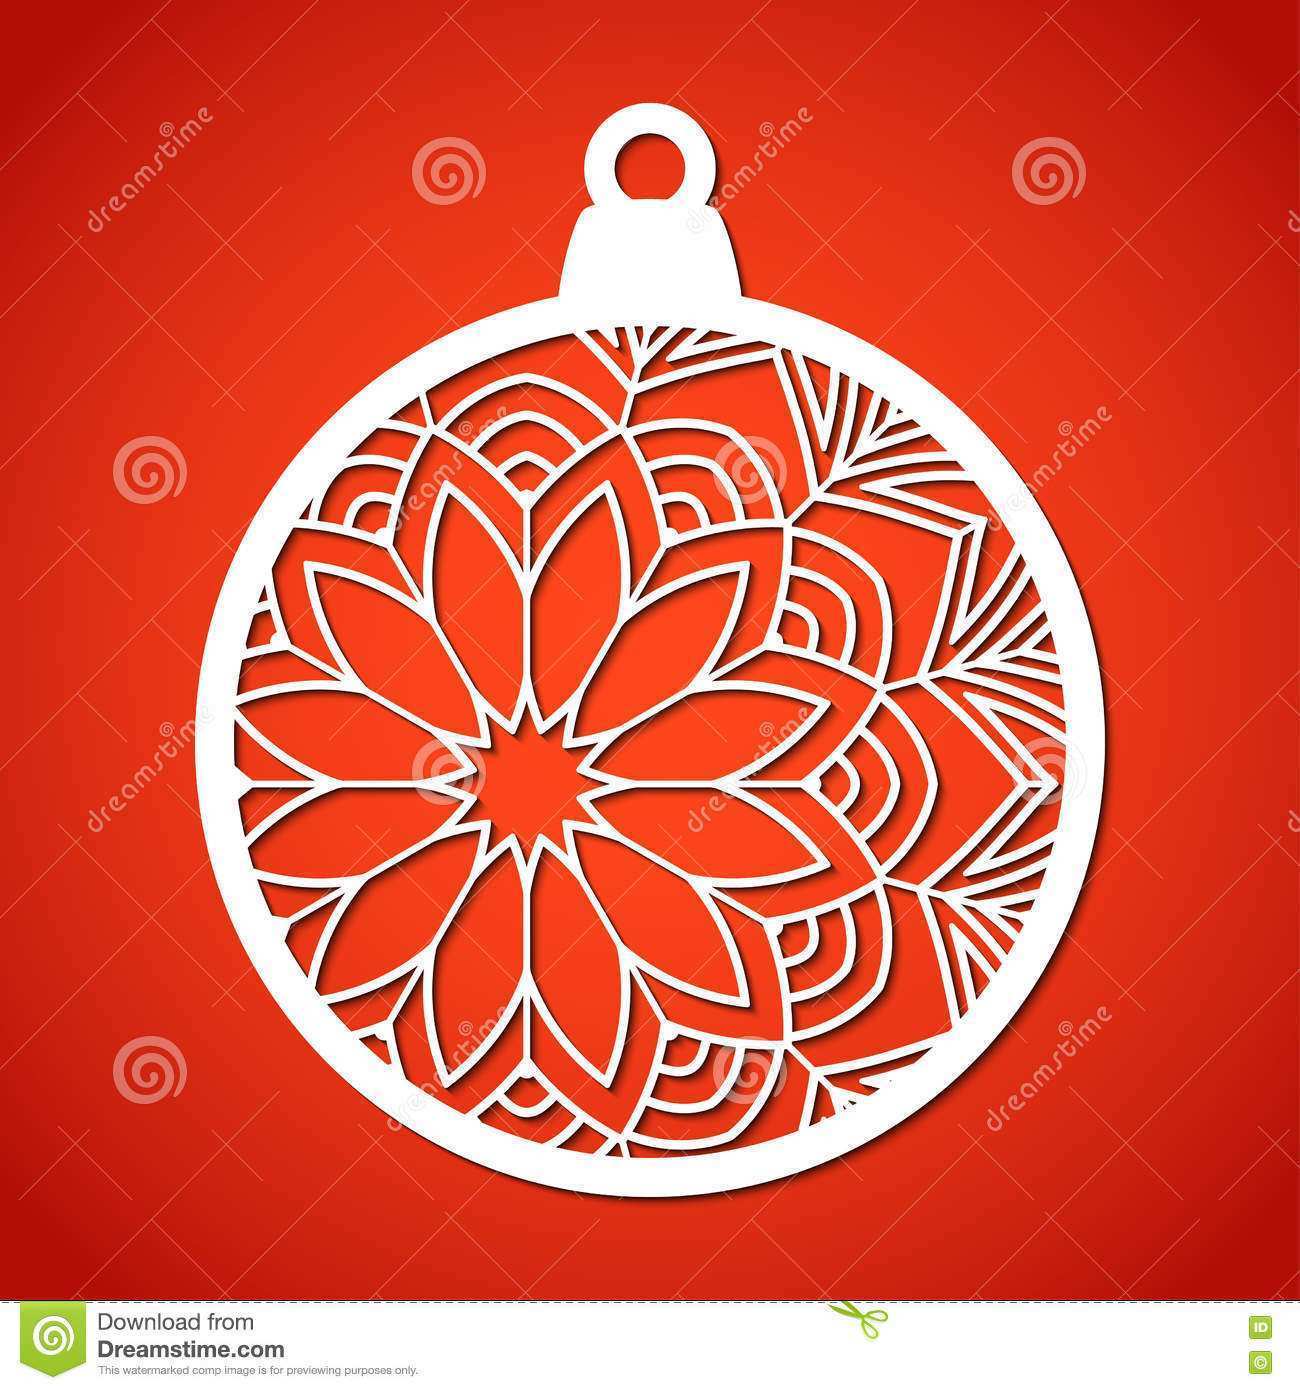 39 Best Christmas Bauble Template For Christmas Card Now for Christmas Bauble Template For Christmas Card